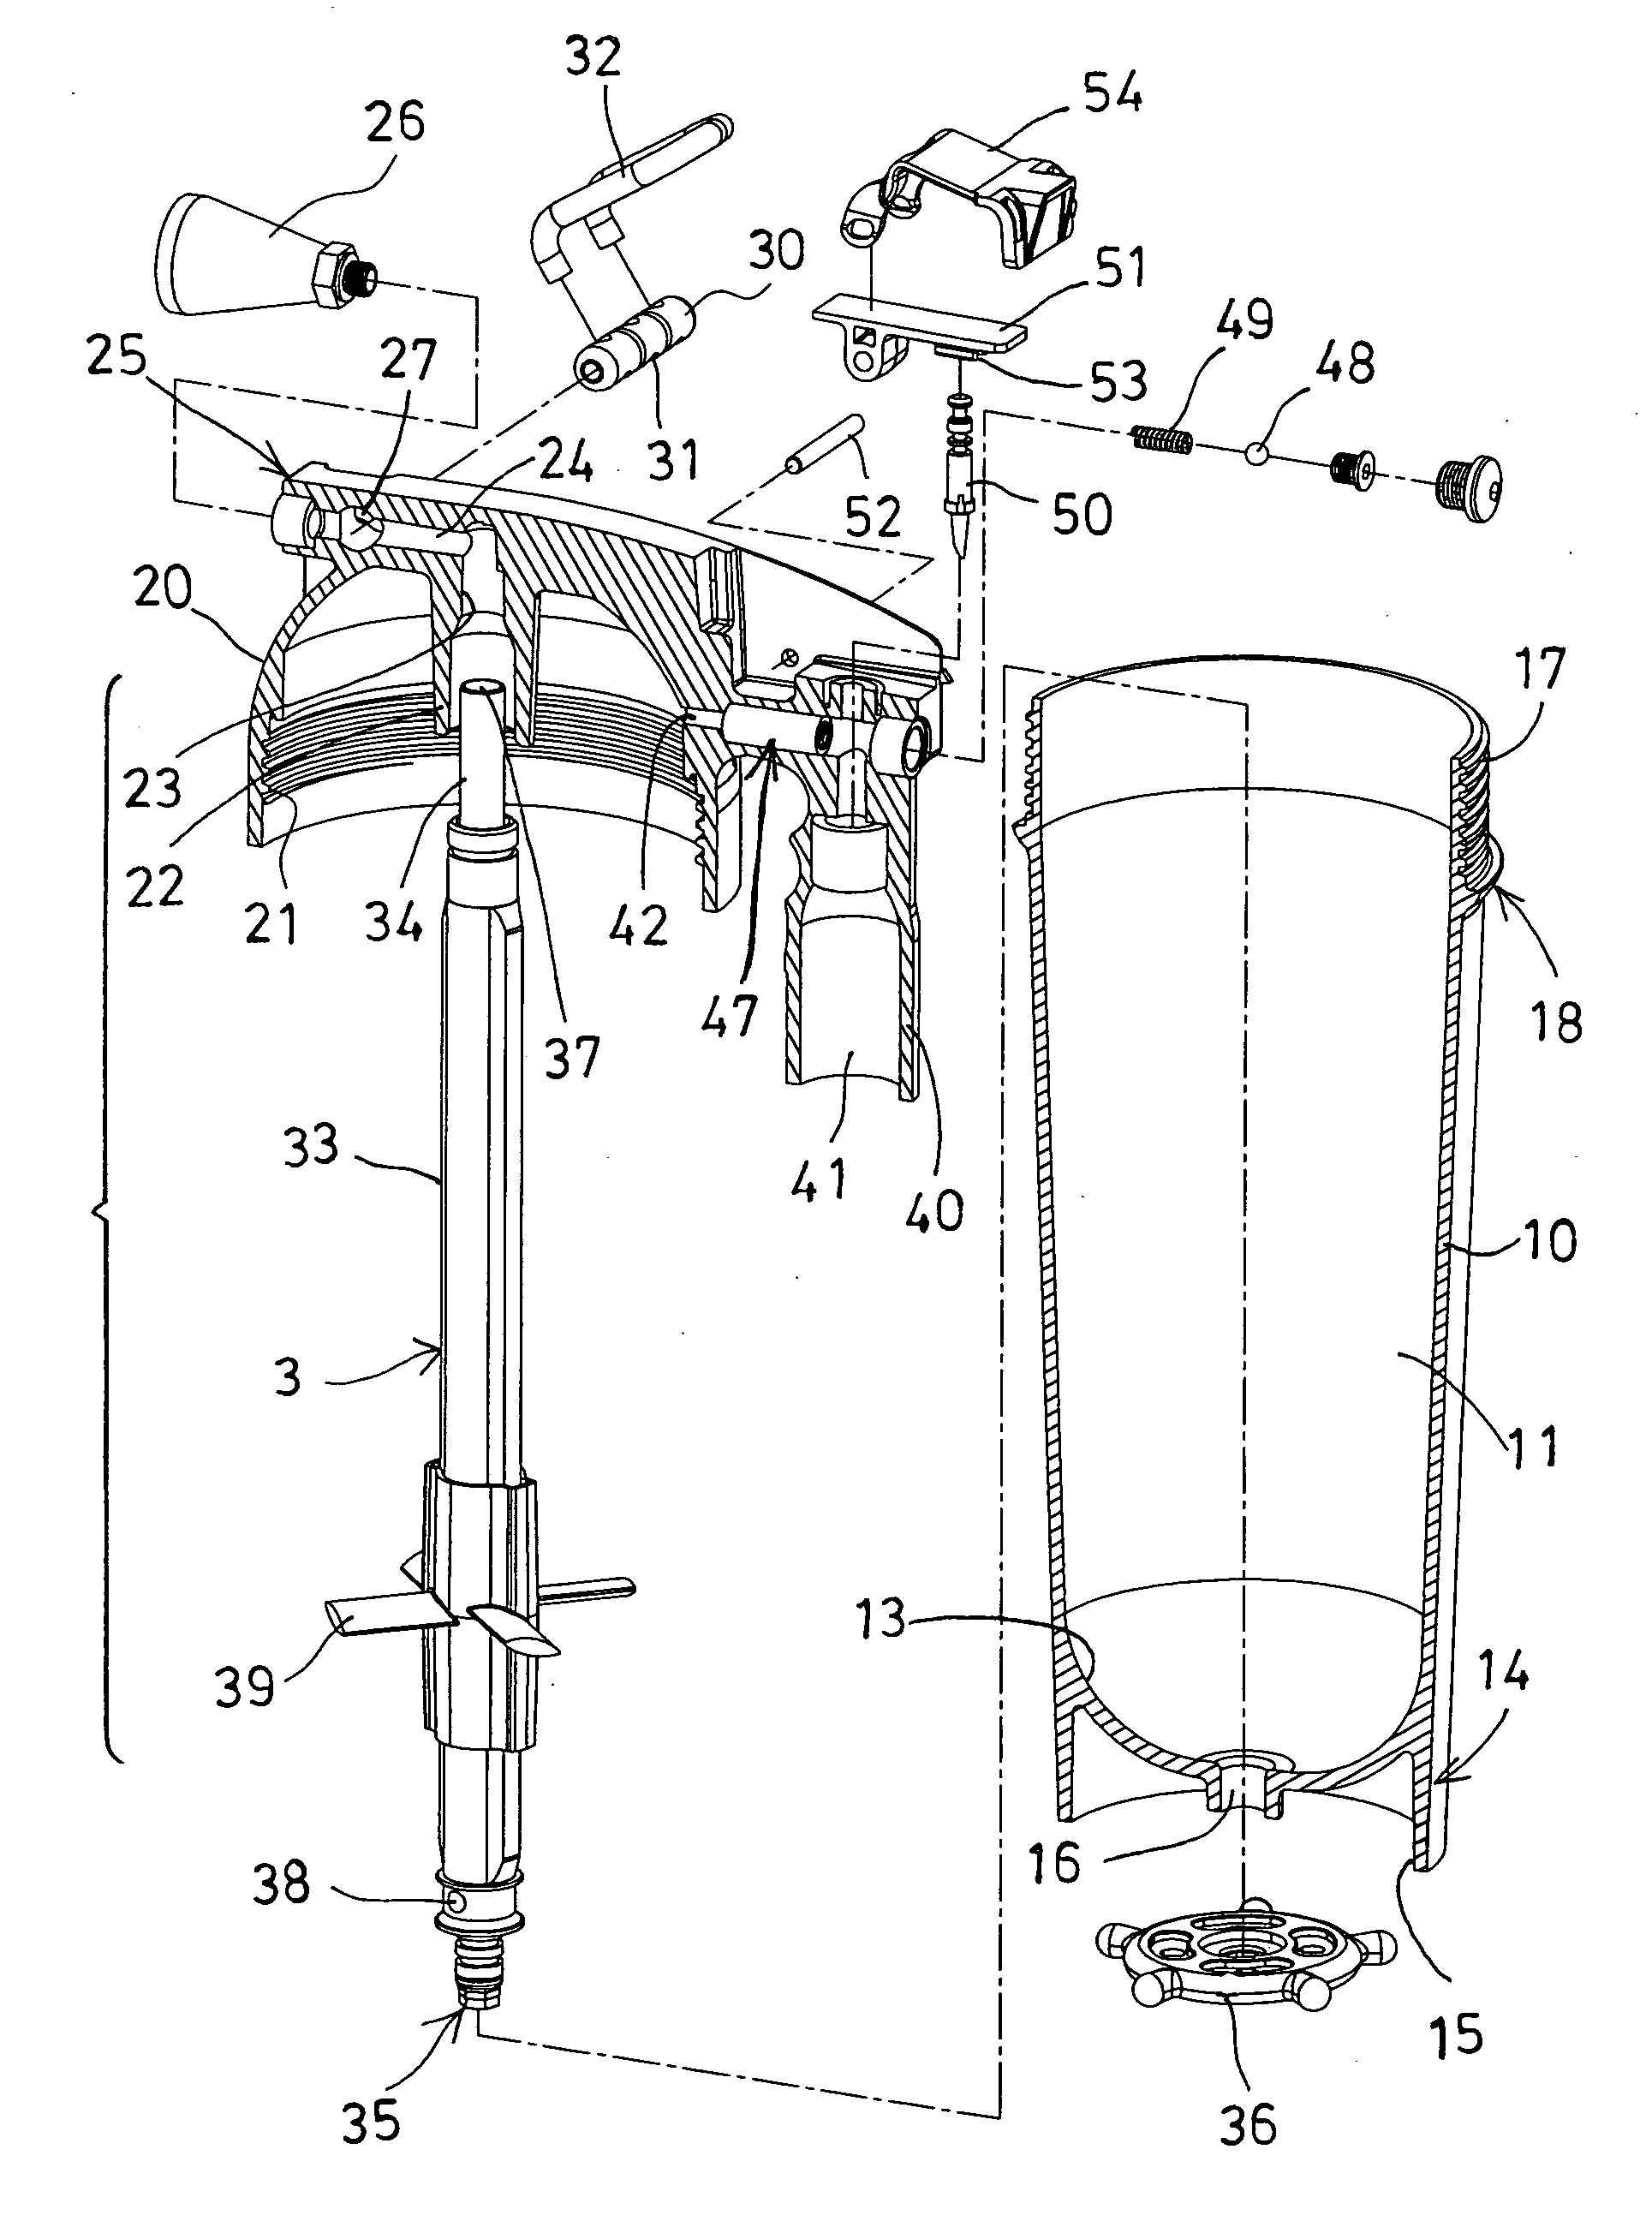 Powder agitating device for fire extinguisher